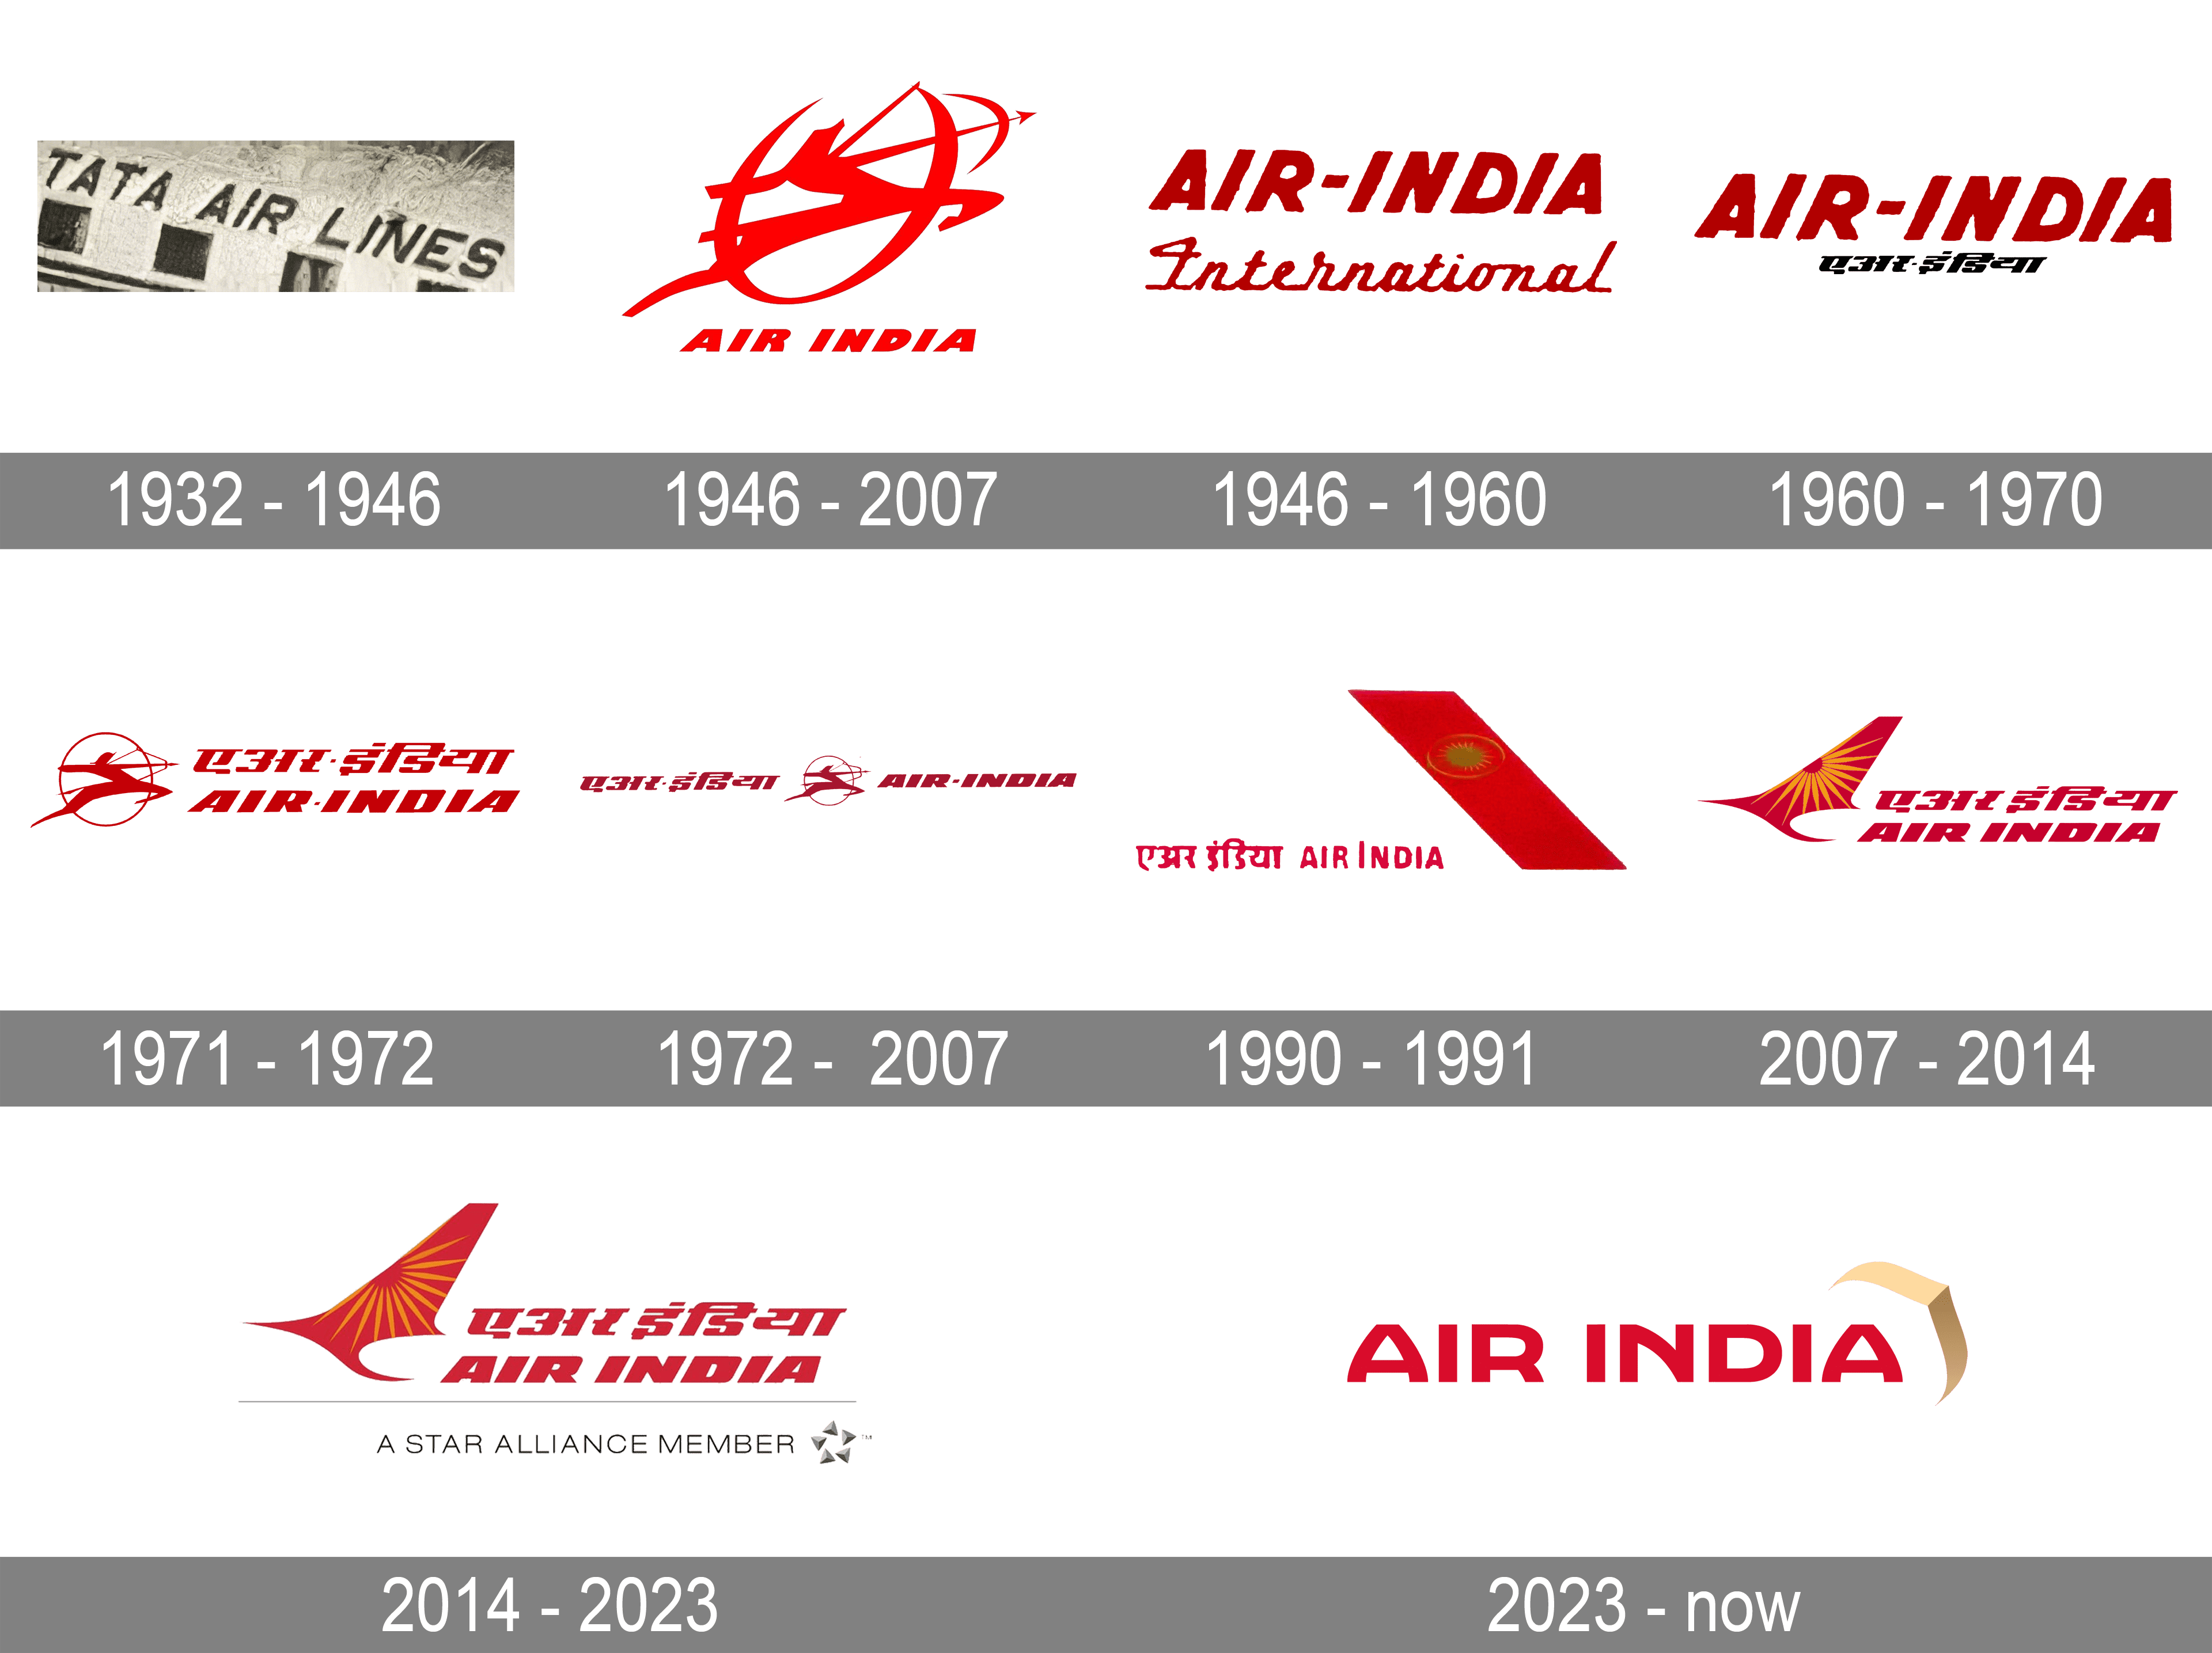 Air India unveils refreshed website